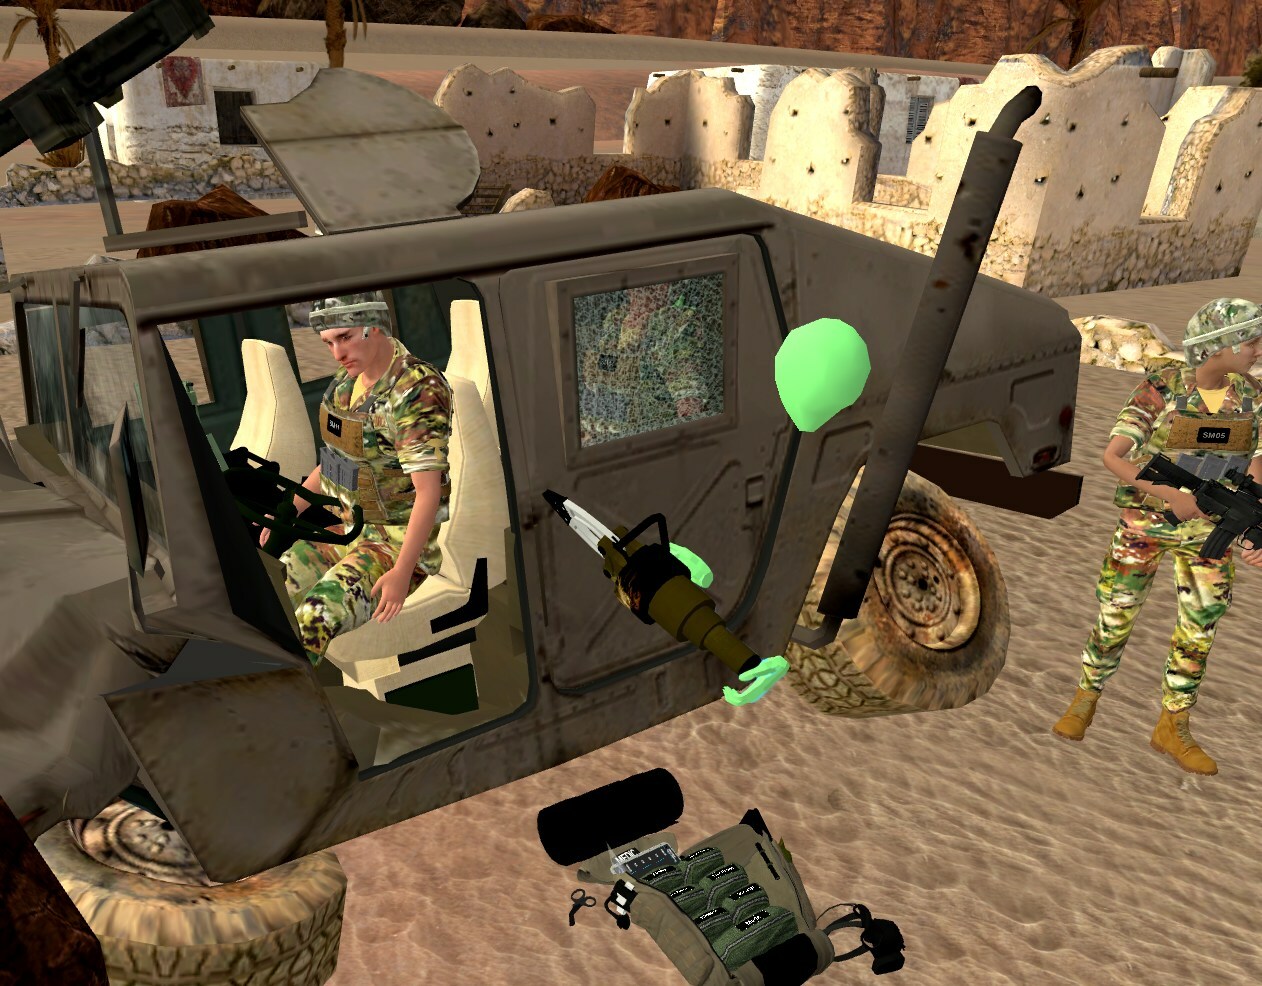 Depicted is an in-application image from a USAF combat extrication scenario developed by SimX as part of the project, in which a trainee is a hydraulic spreader to rescue wounded Warfighters from a damaged vehicle. (Image by SimX, Inc.)